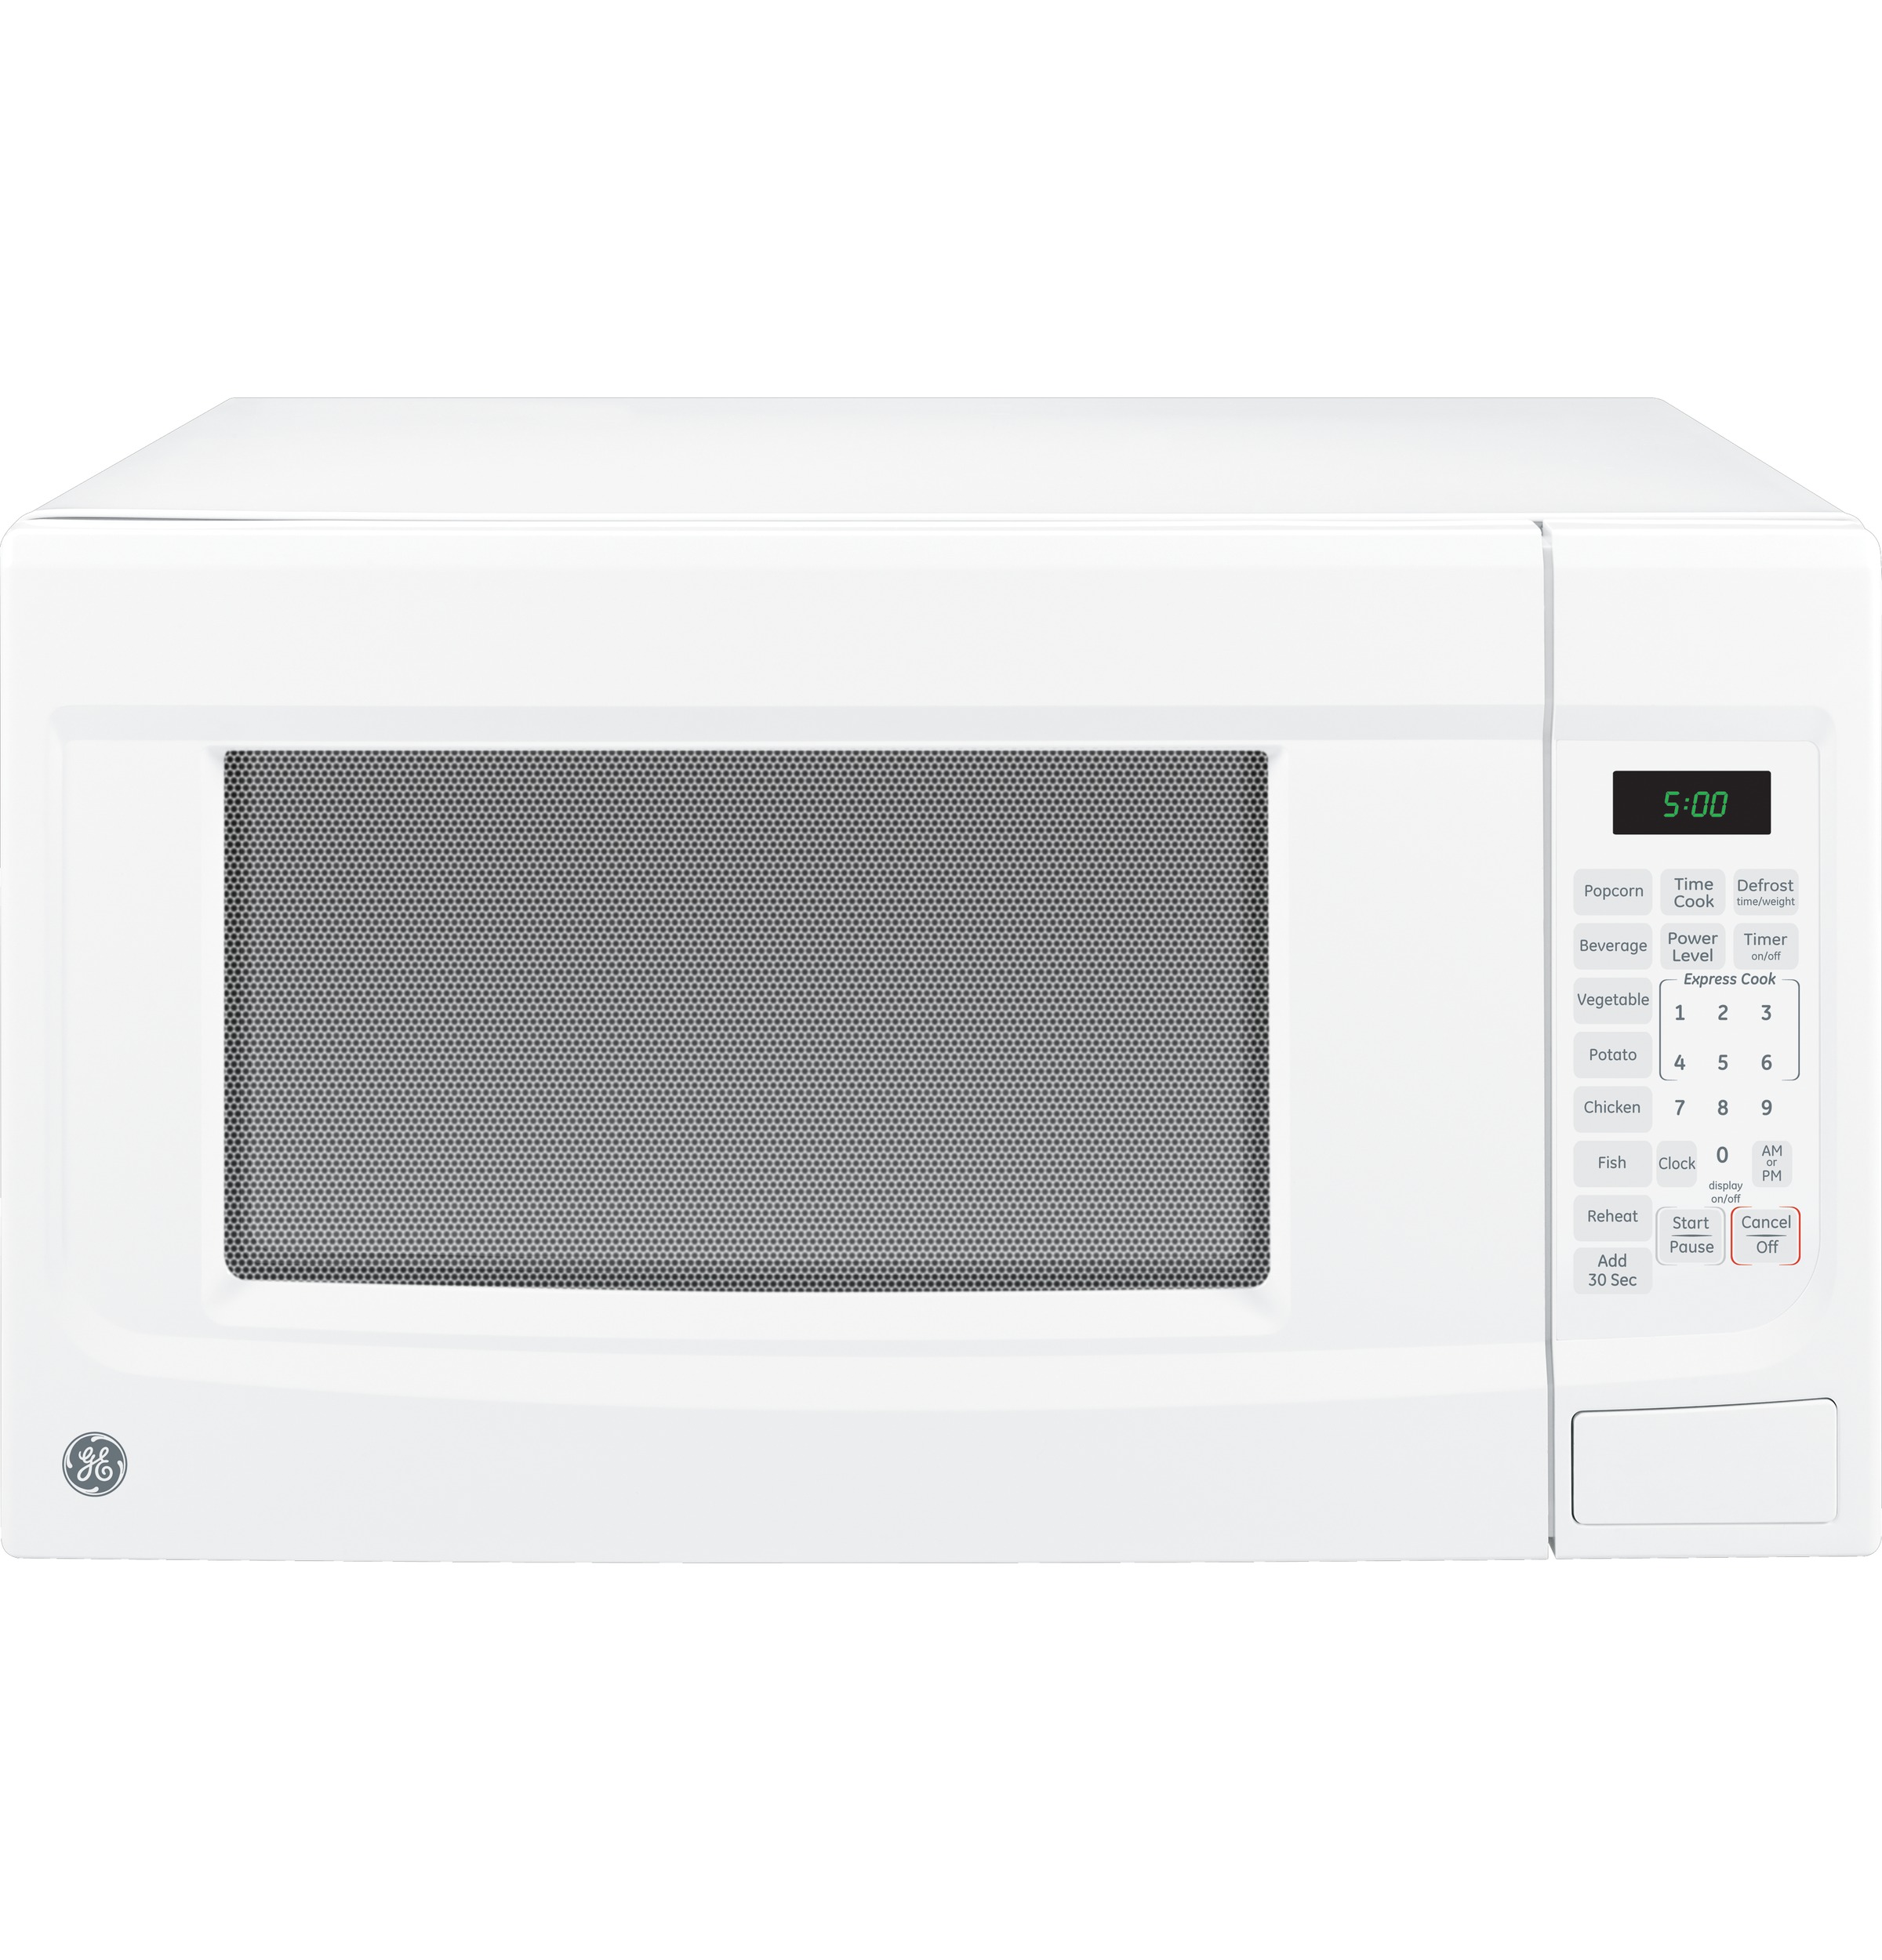 GE® 1.4 Cubic Foot Capacity Countertop Microwave Oven, White, JES1460DSWW - image 1 of 11